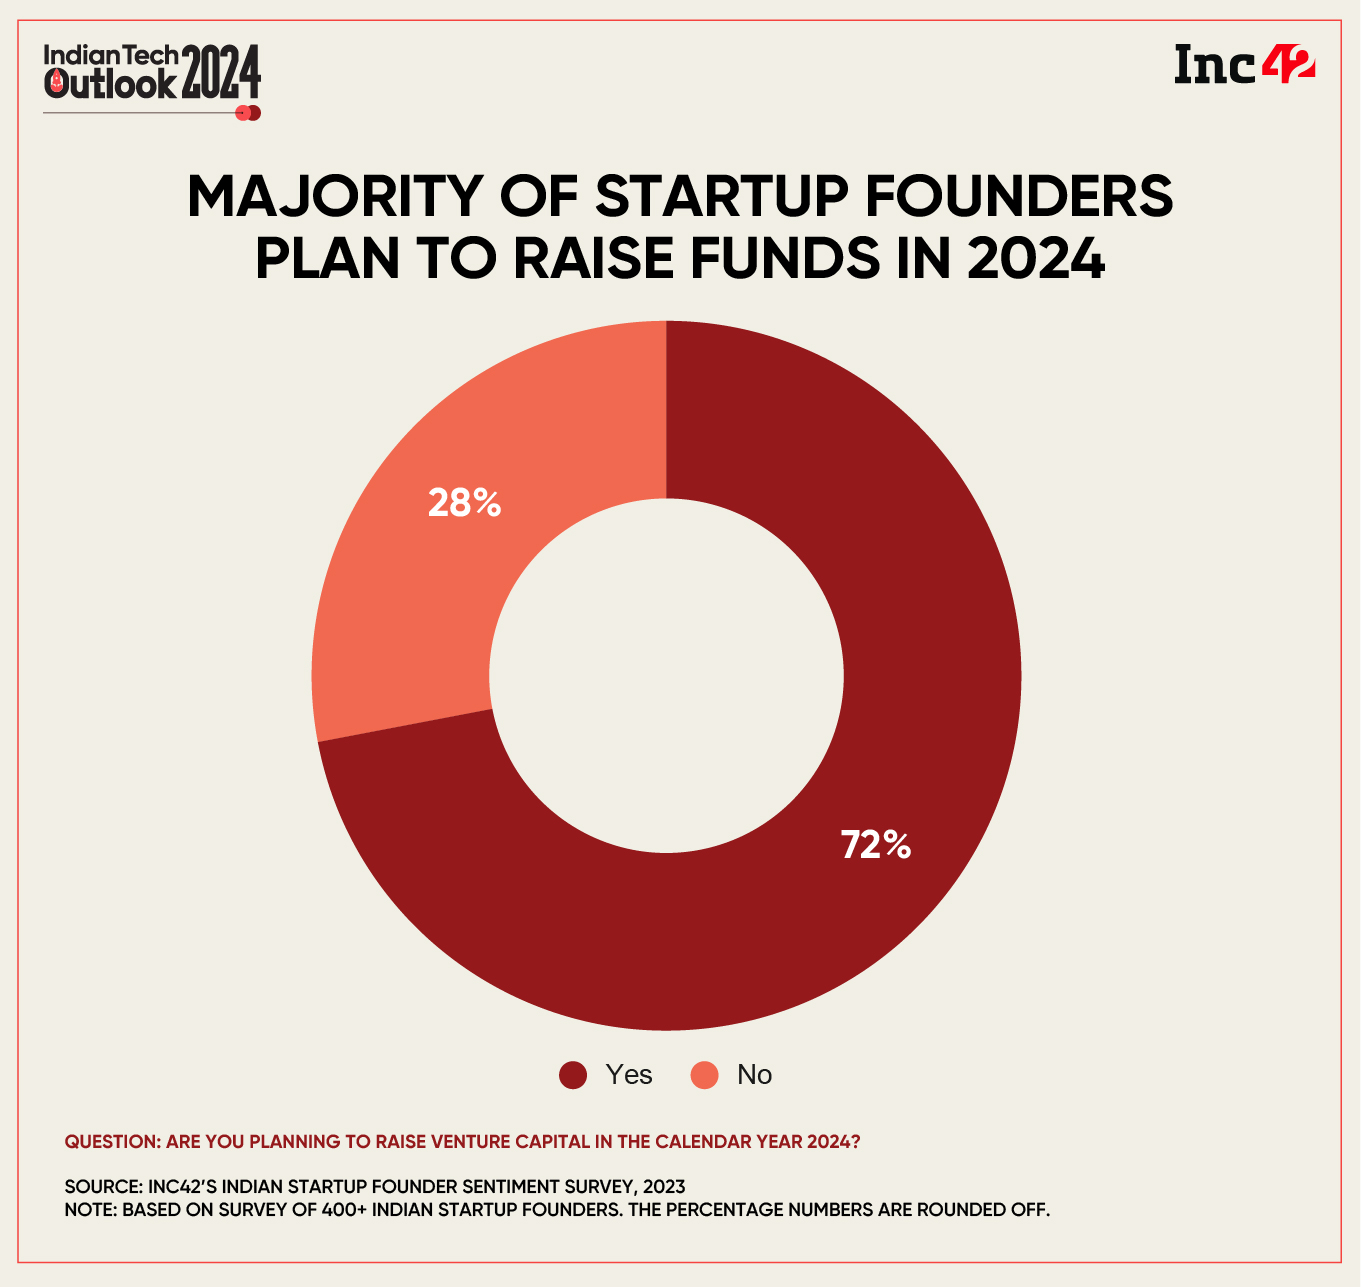 Banking on this positive turnaround in sentiment, the majority of the surveyed entrepreneurs, 72%, plan to raise funds In 2024. 